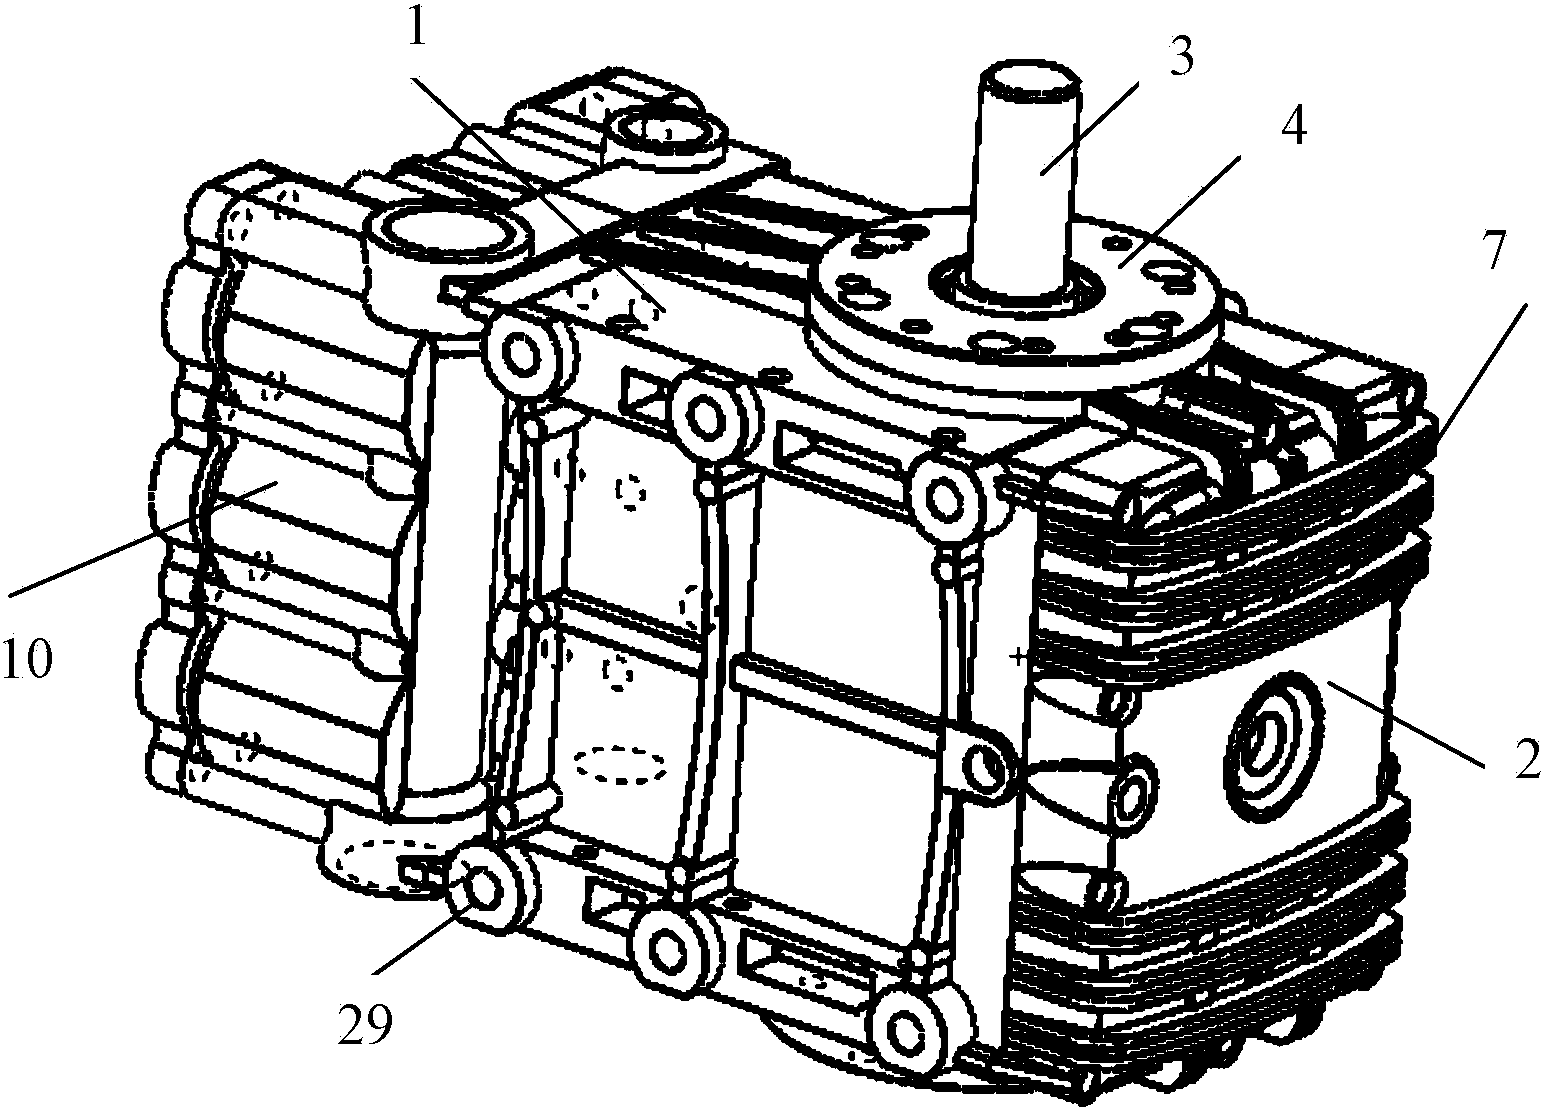 Small-sized and multipurpose high-pressure pump